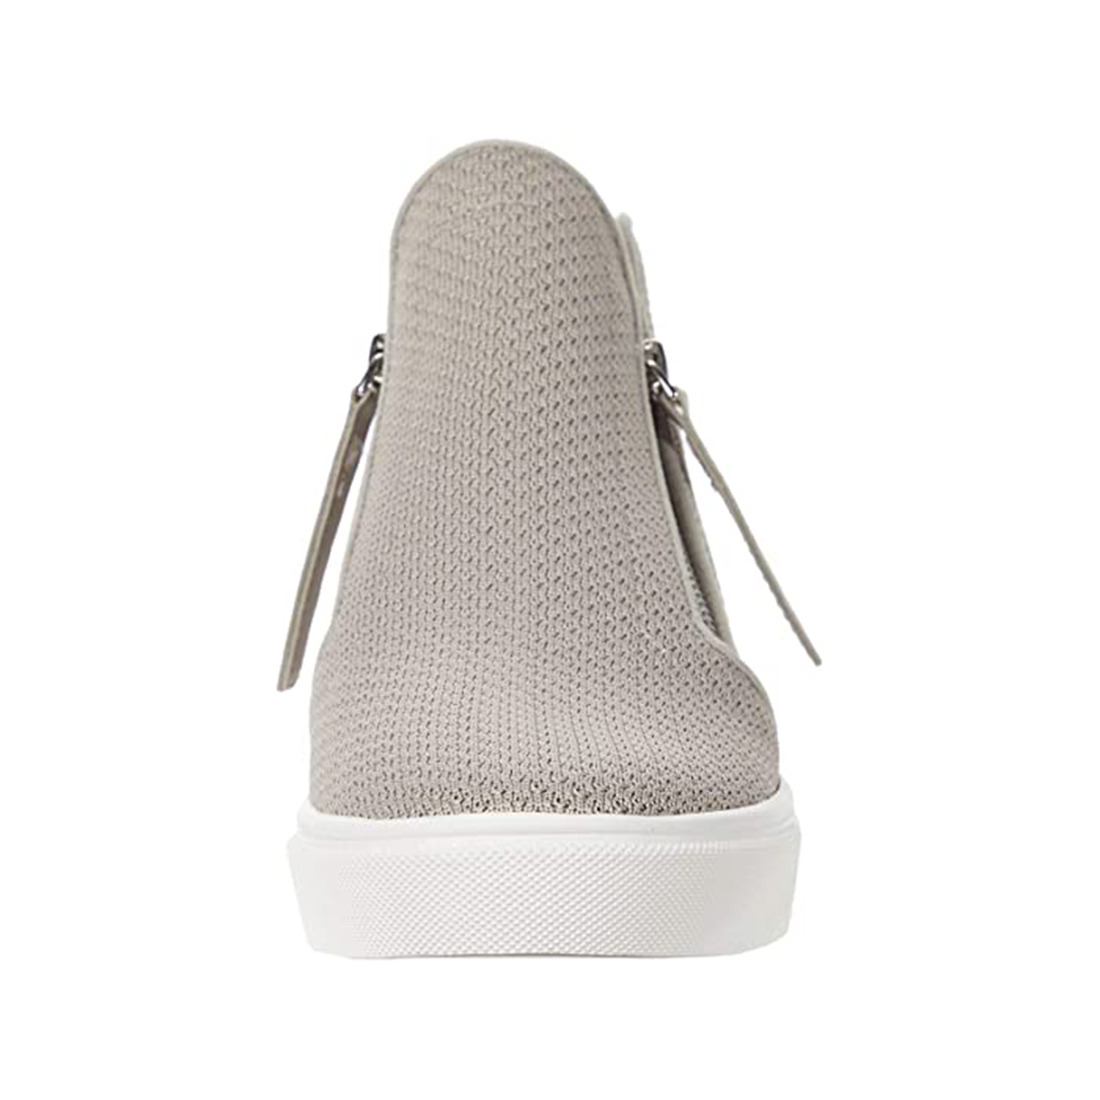 Steve Madden Click Sneaker in Taupe | Cotton Island Women's Clothing ...